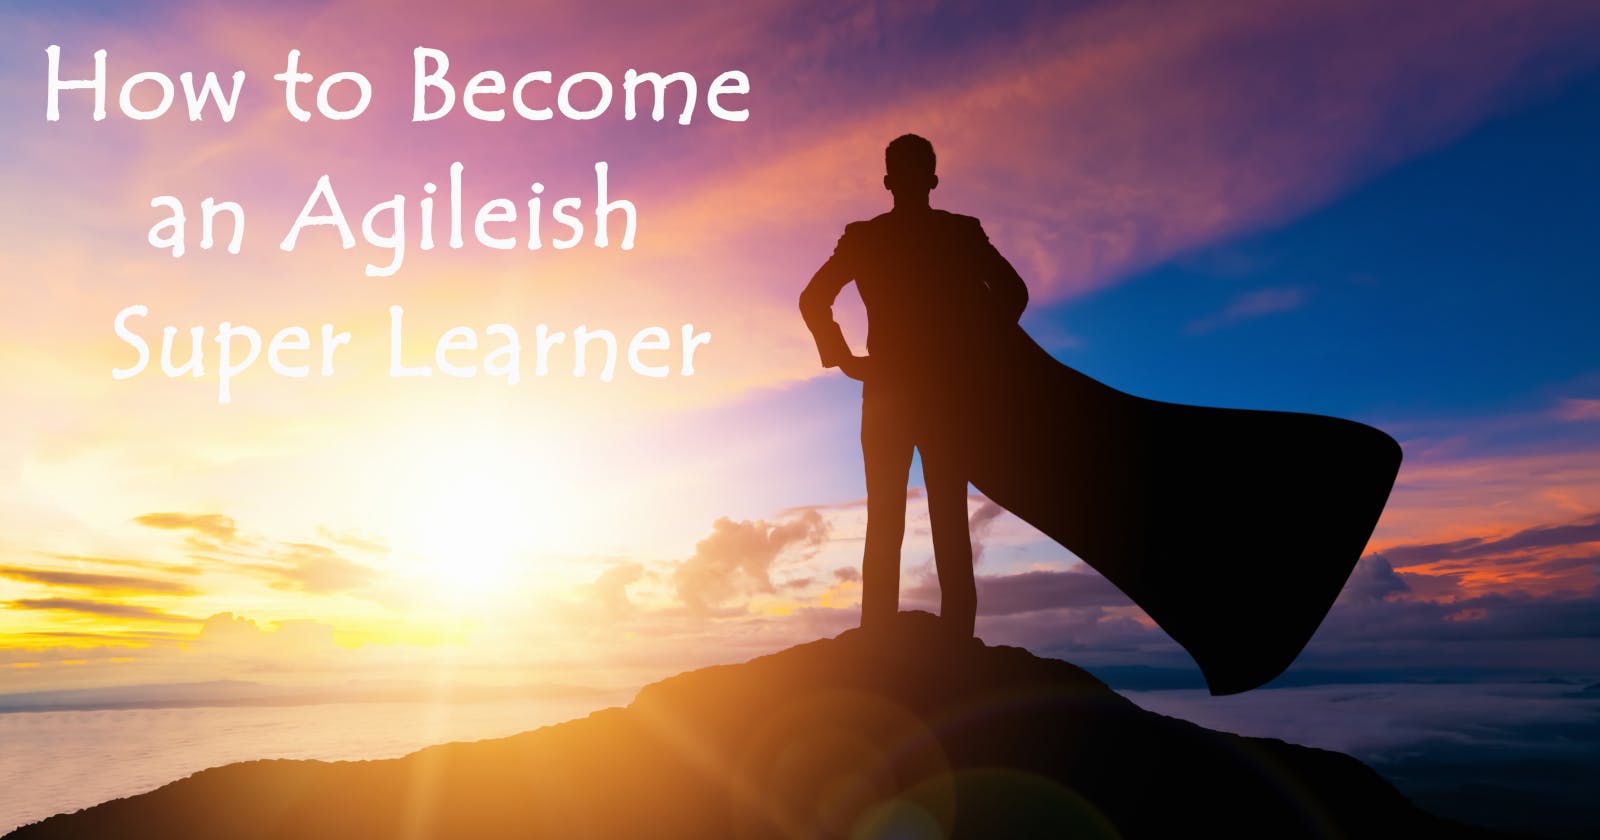 How You Can Become An Agileish Super Learner AKA How You Can Become A Super Thinker AKA The Proof Of Concept (POC)